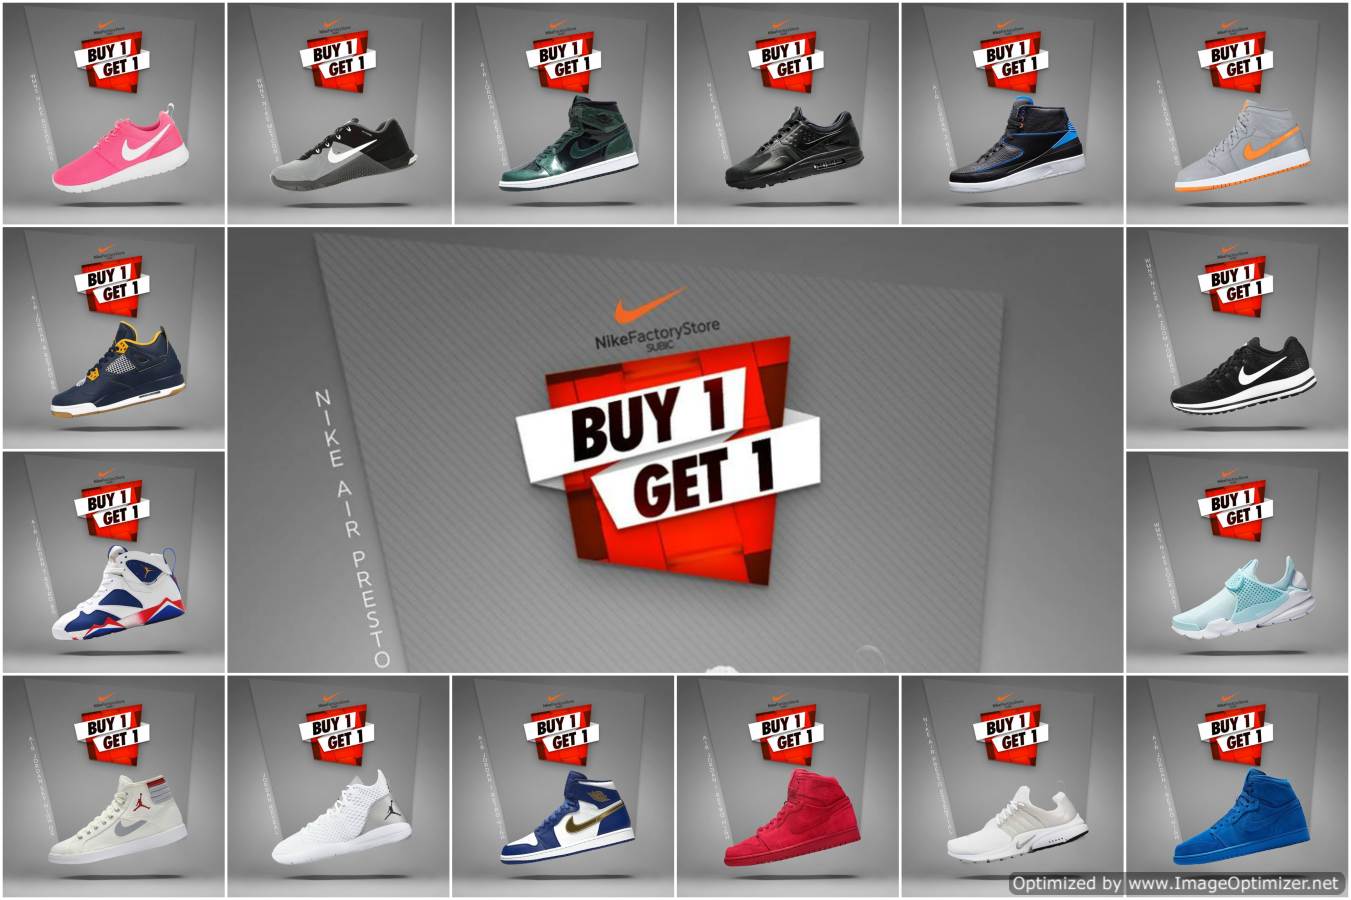 NIKE Factory Store Subic-Buy 1 Get 1 FREE